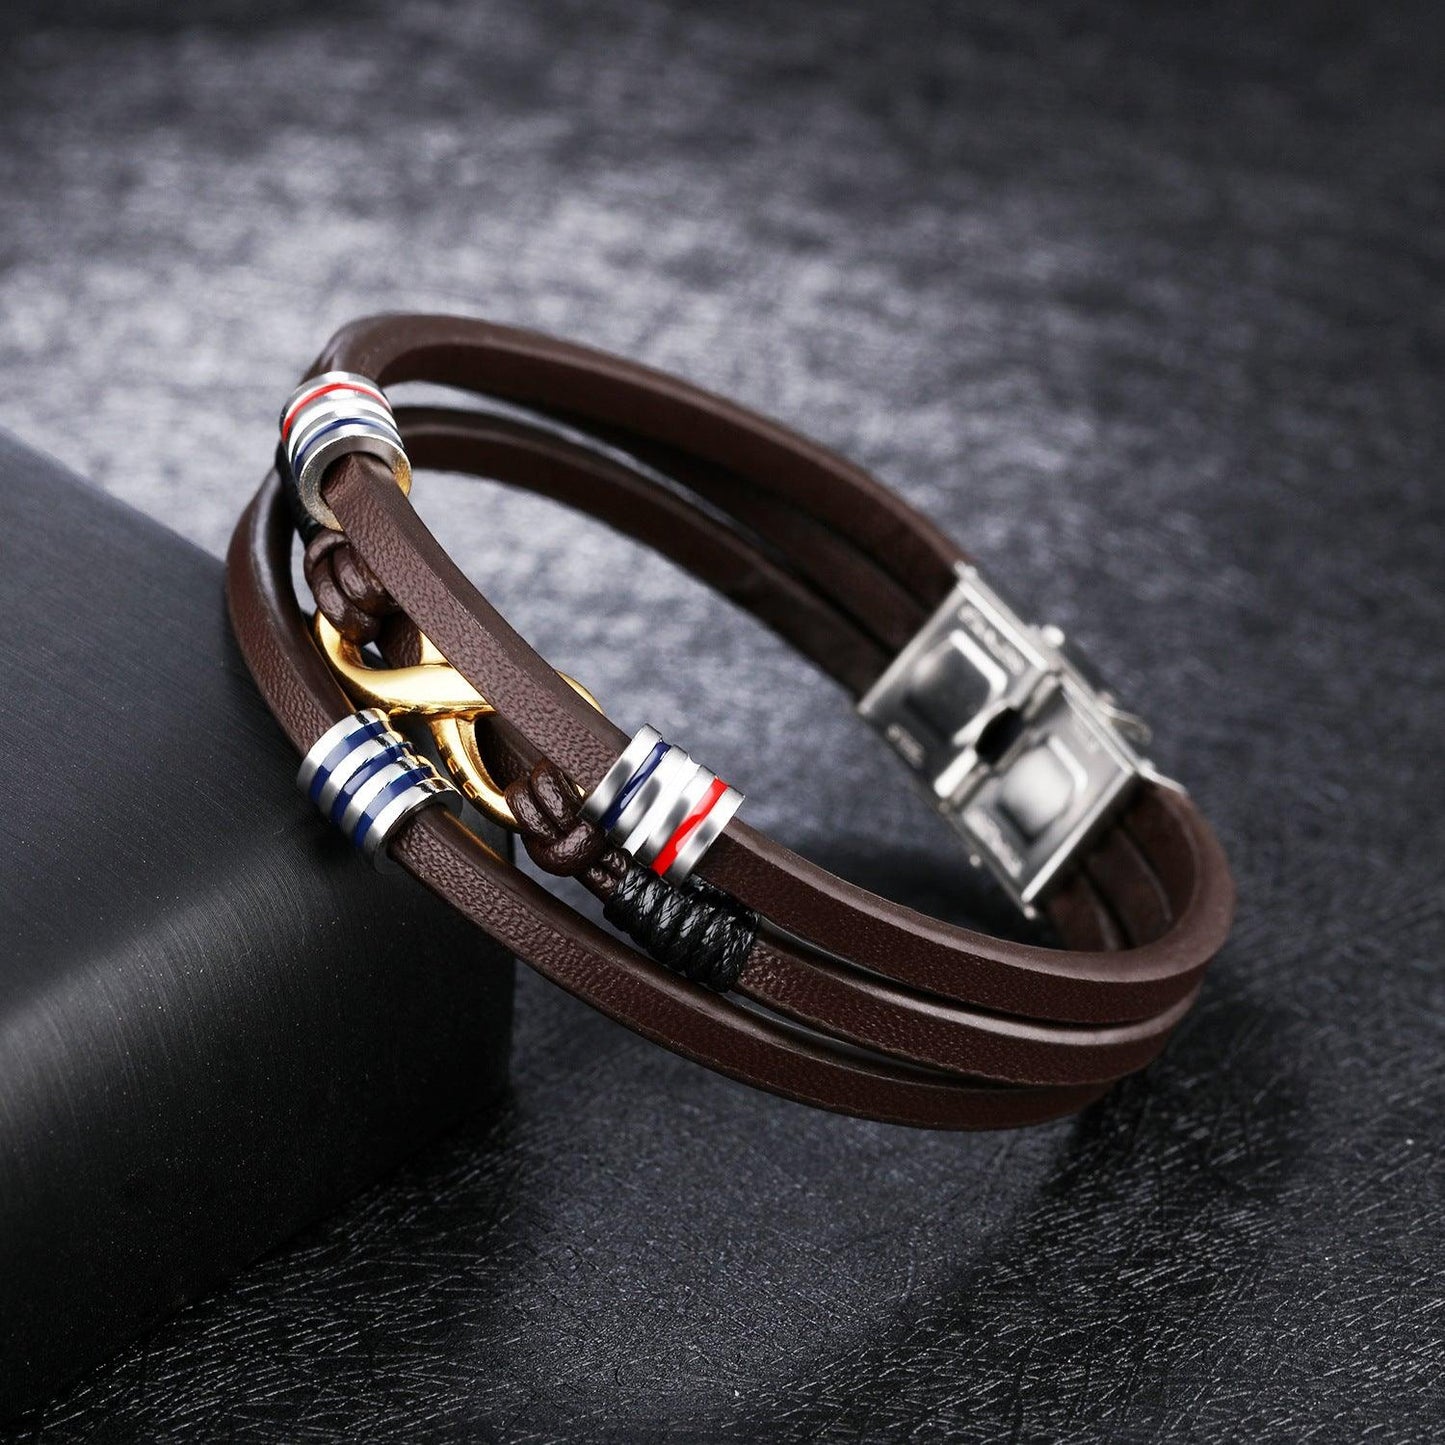 This Brown Leather Bracelet Adds an Effortless Touch of Style To Any Look - BUNNY BAZAR